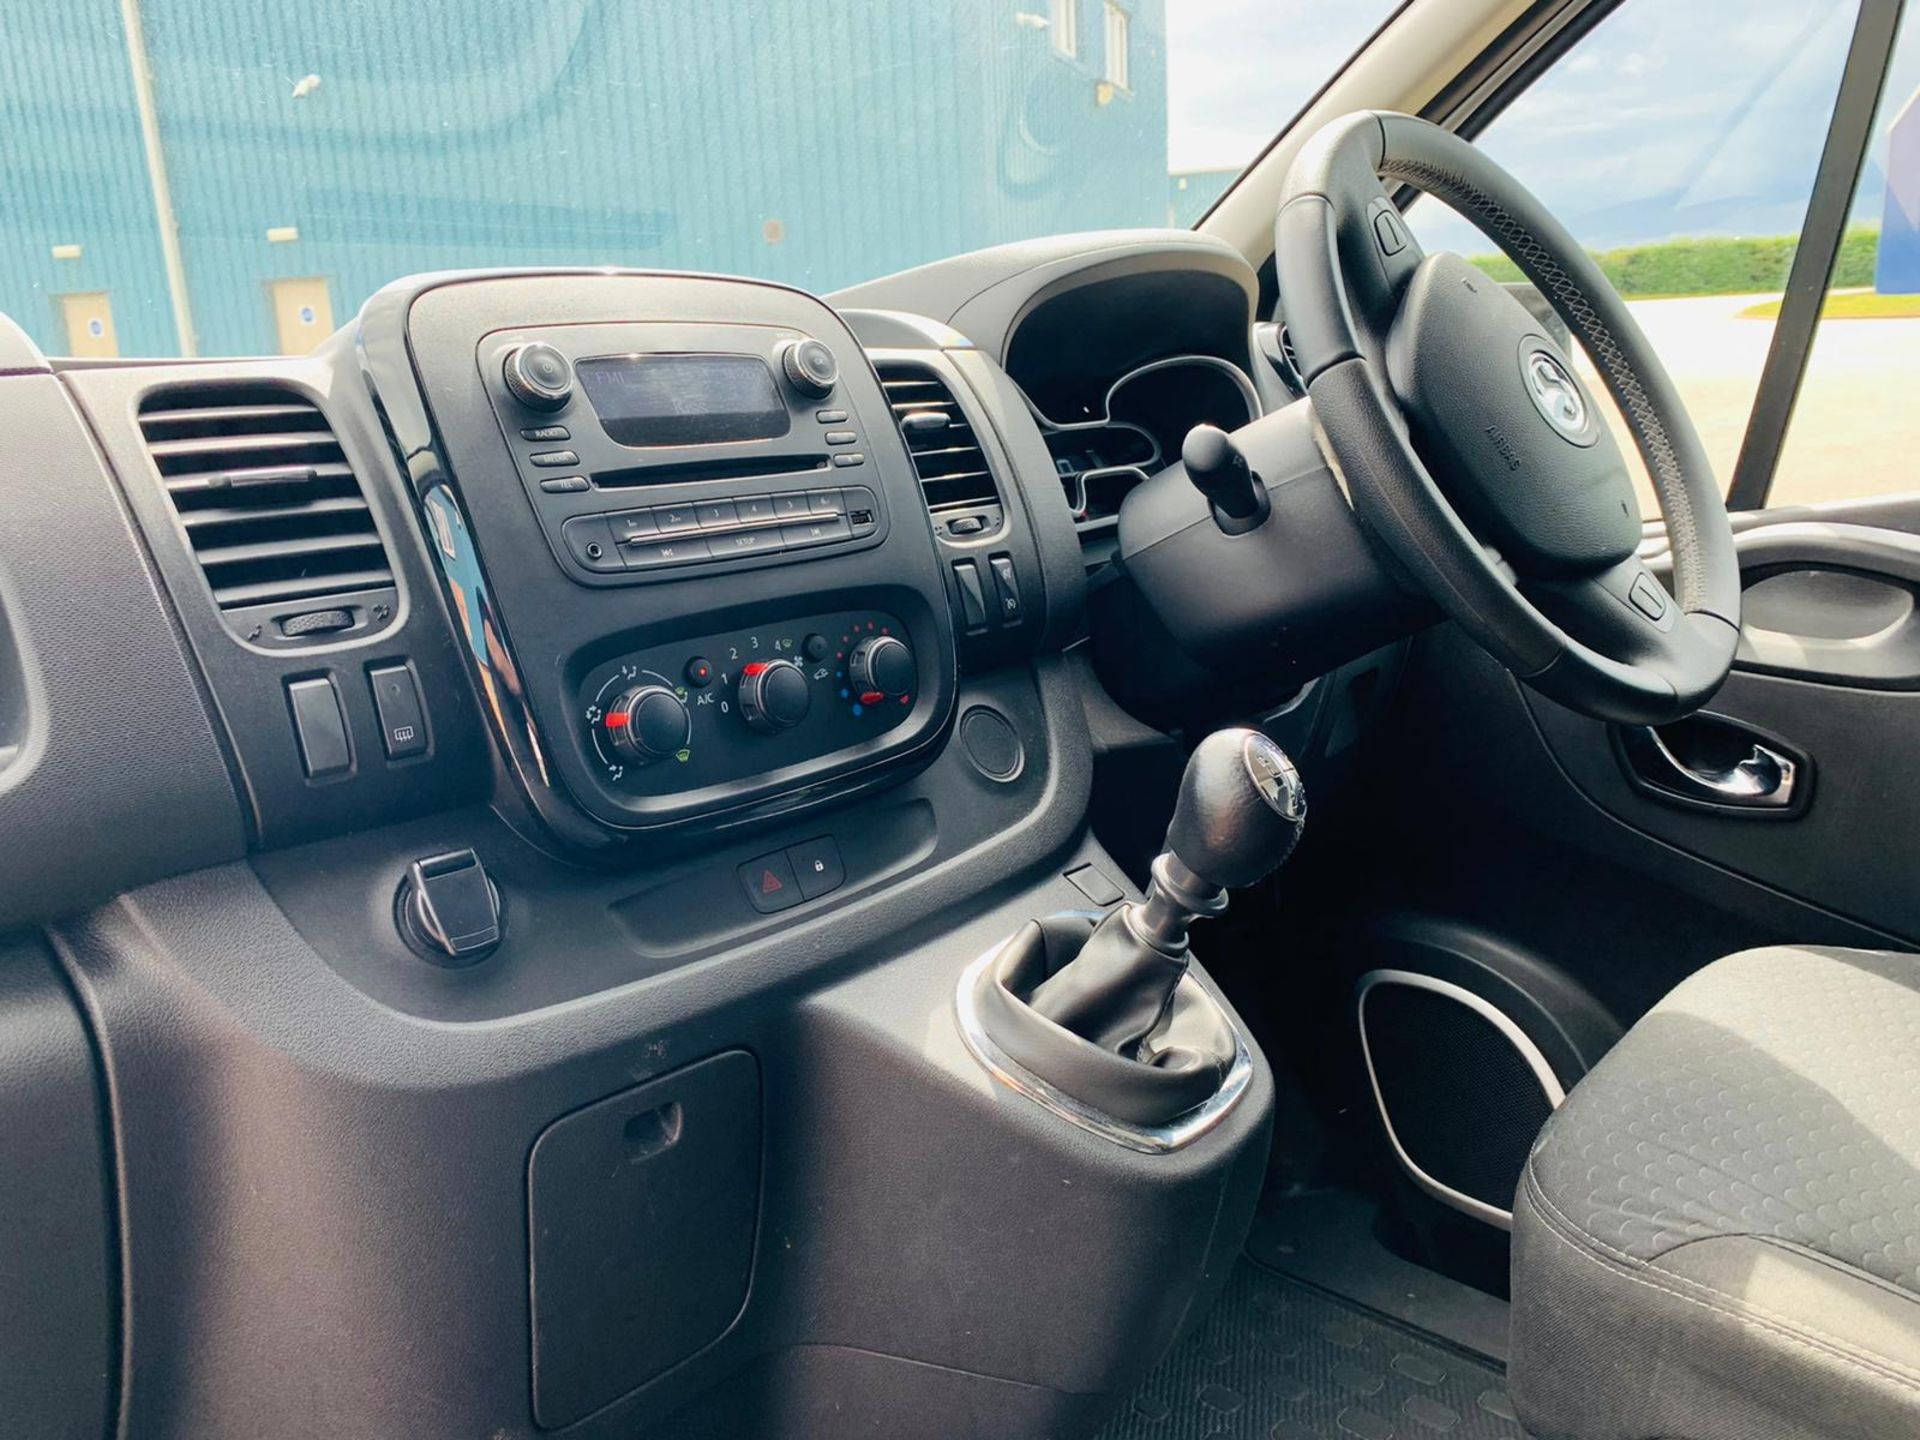 Vauxhall Vivaro 2900 1.6 CDTI Sportive - 2019 Model - 6 Speed - Air Con - Cruise - ONLY 25K Miles - Image 12 of 24